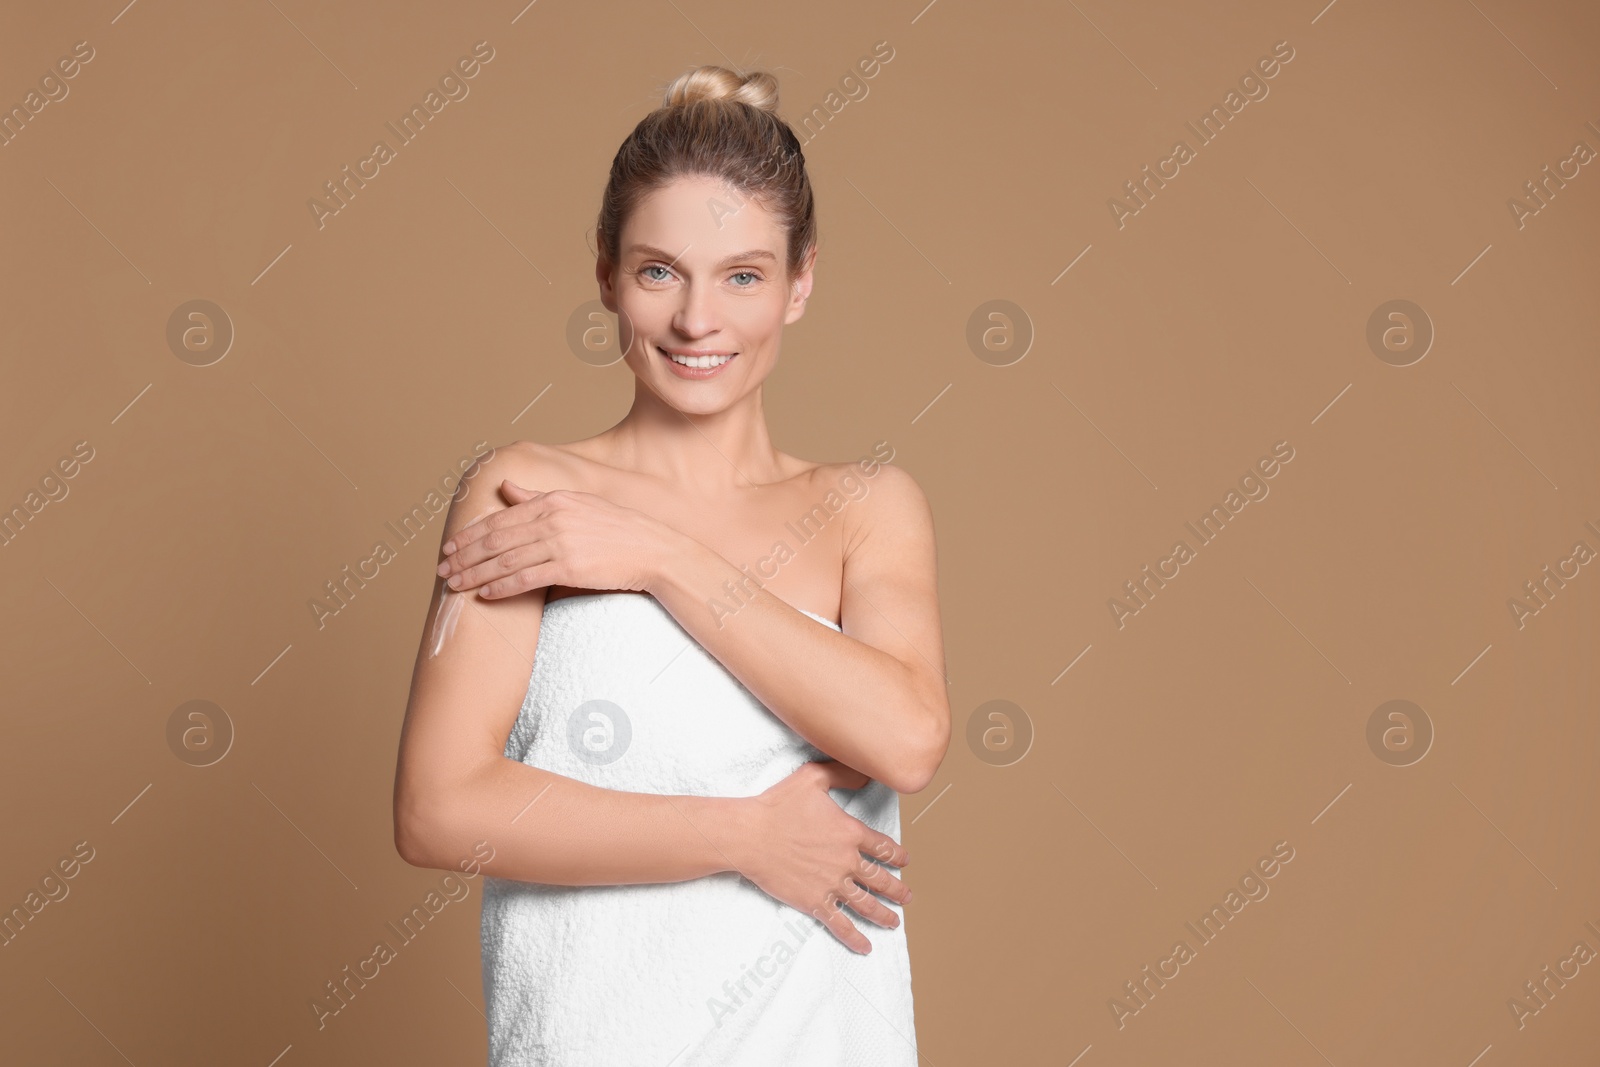 Photo of Woman applying body cream onto her arm against beige background, space for text